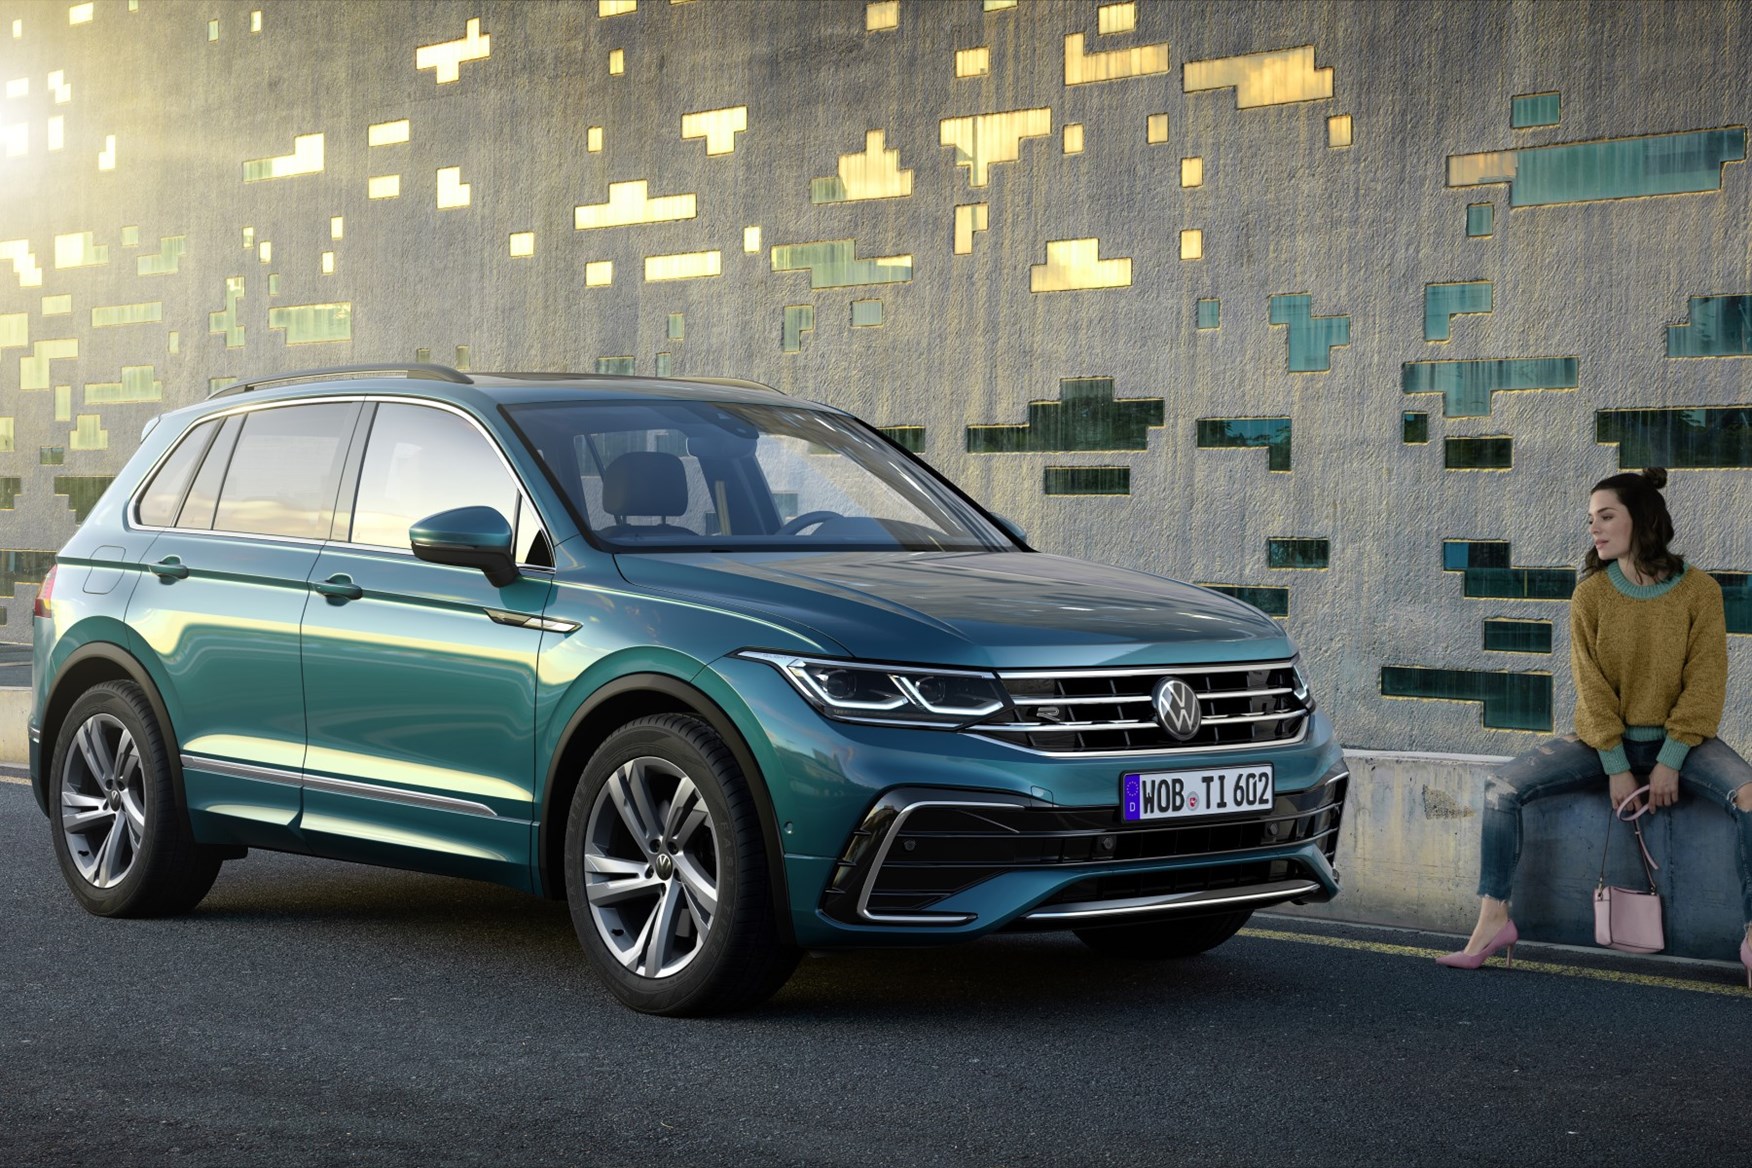 VW Tiguan gets major refresh with new tech and plug-in powertrain | Parkers